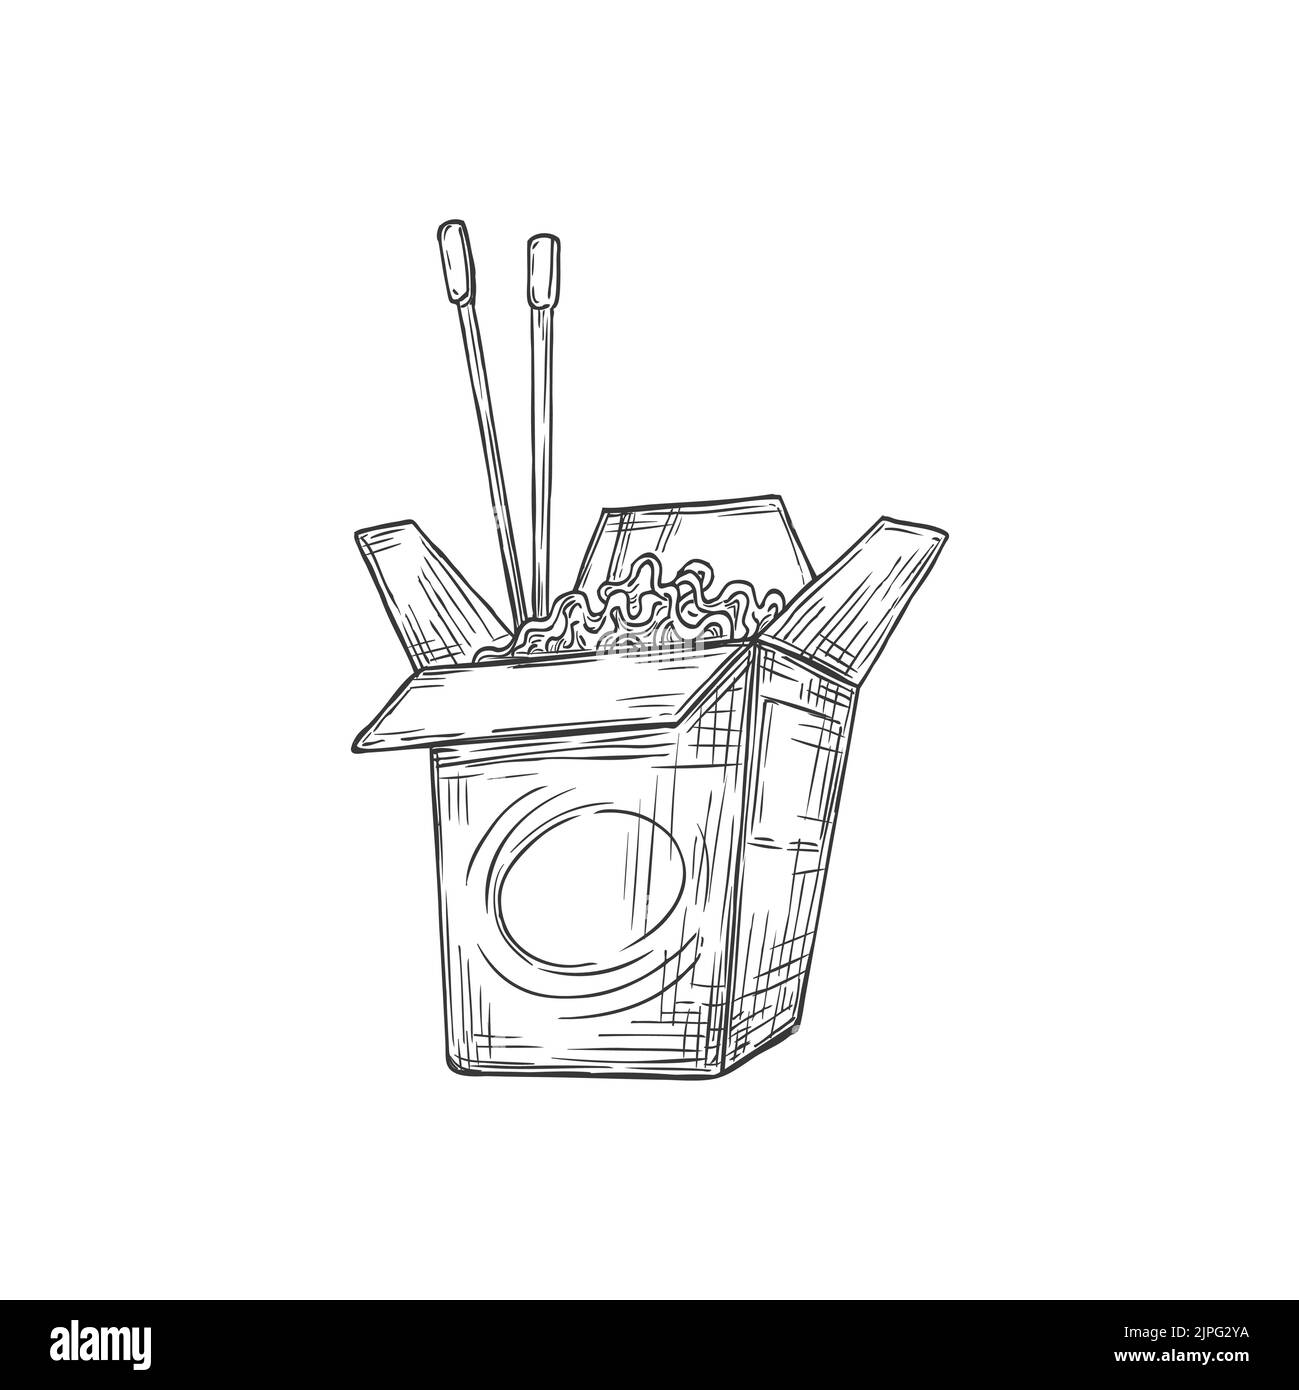 Chinese noodles, chopsticks in box isolated monochrome icon. Vector open takeout box with street food, takeaway fast food snack sketch. Udon stir fry noodles with chicken and pair of chopsticks Stock Vector